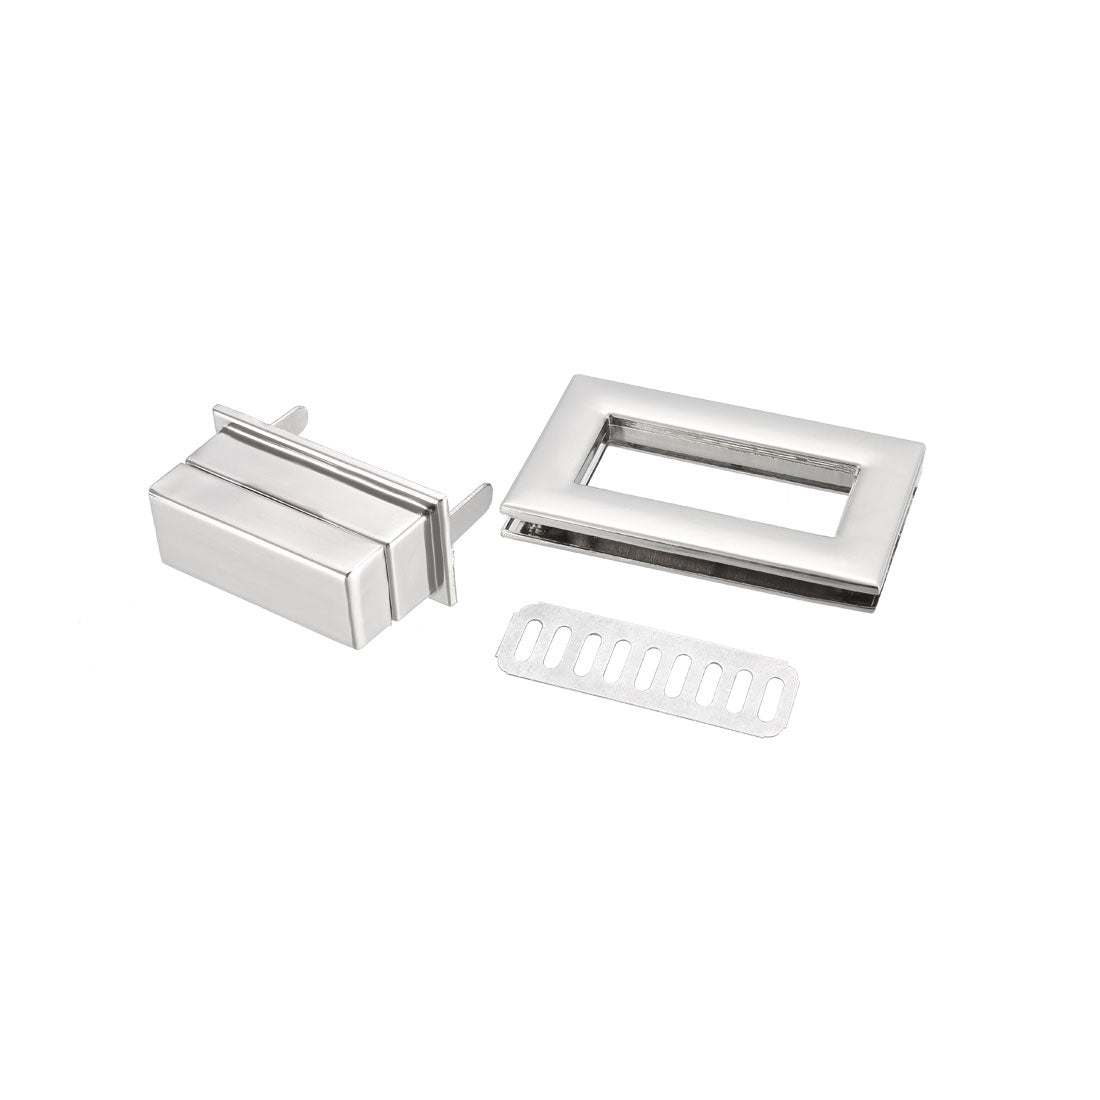 Uxcell Uxcell 2 Sets Rectangular Purses Twist Lock 52mm x 29mm Clutches Closures for DIY Bag Making - Silver